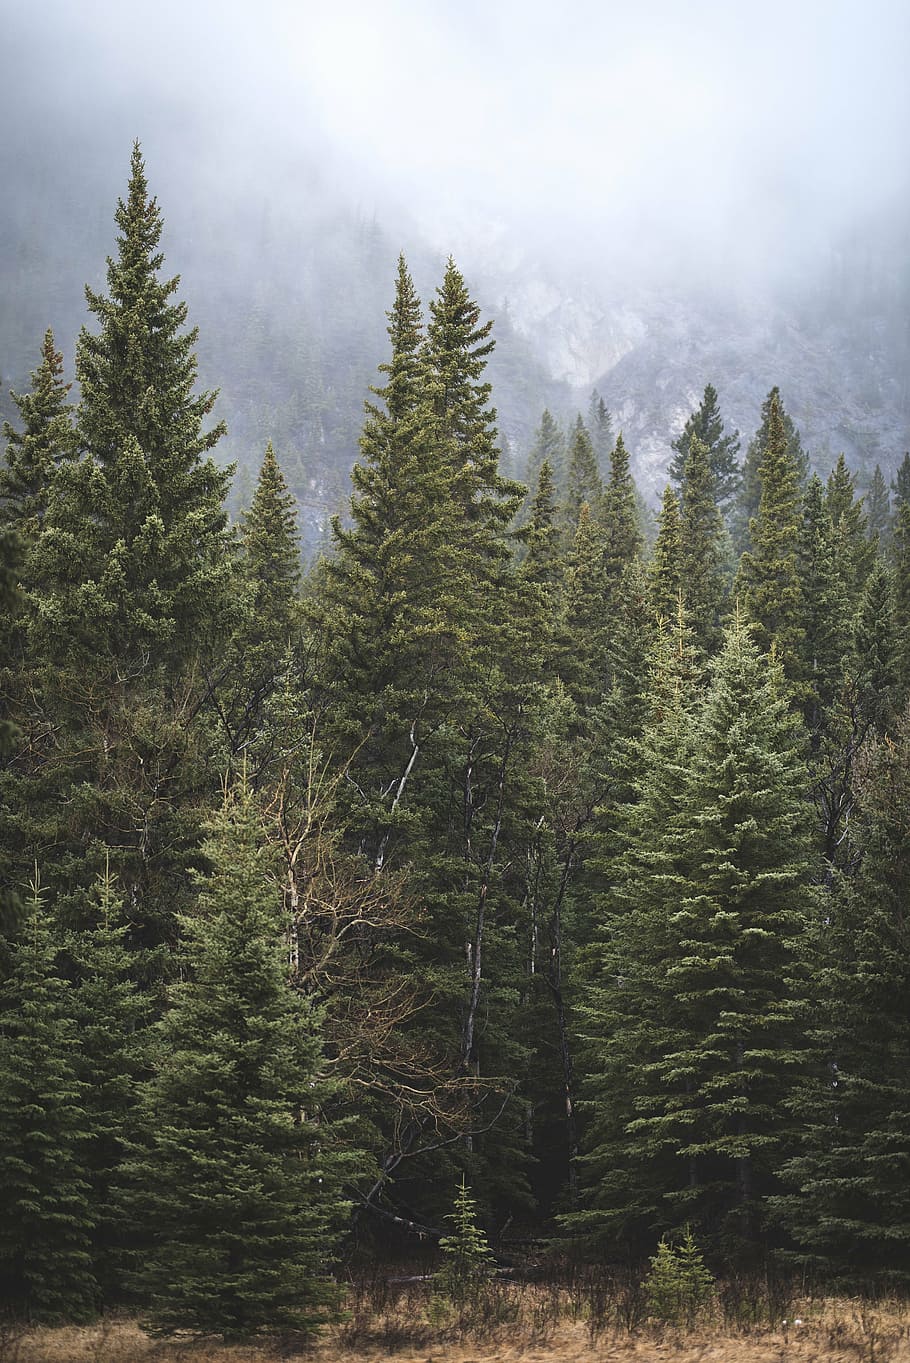 photography, green, trees, pine, nature, forests, fog, clouds, white, pine tree